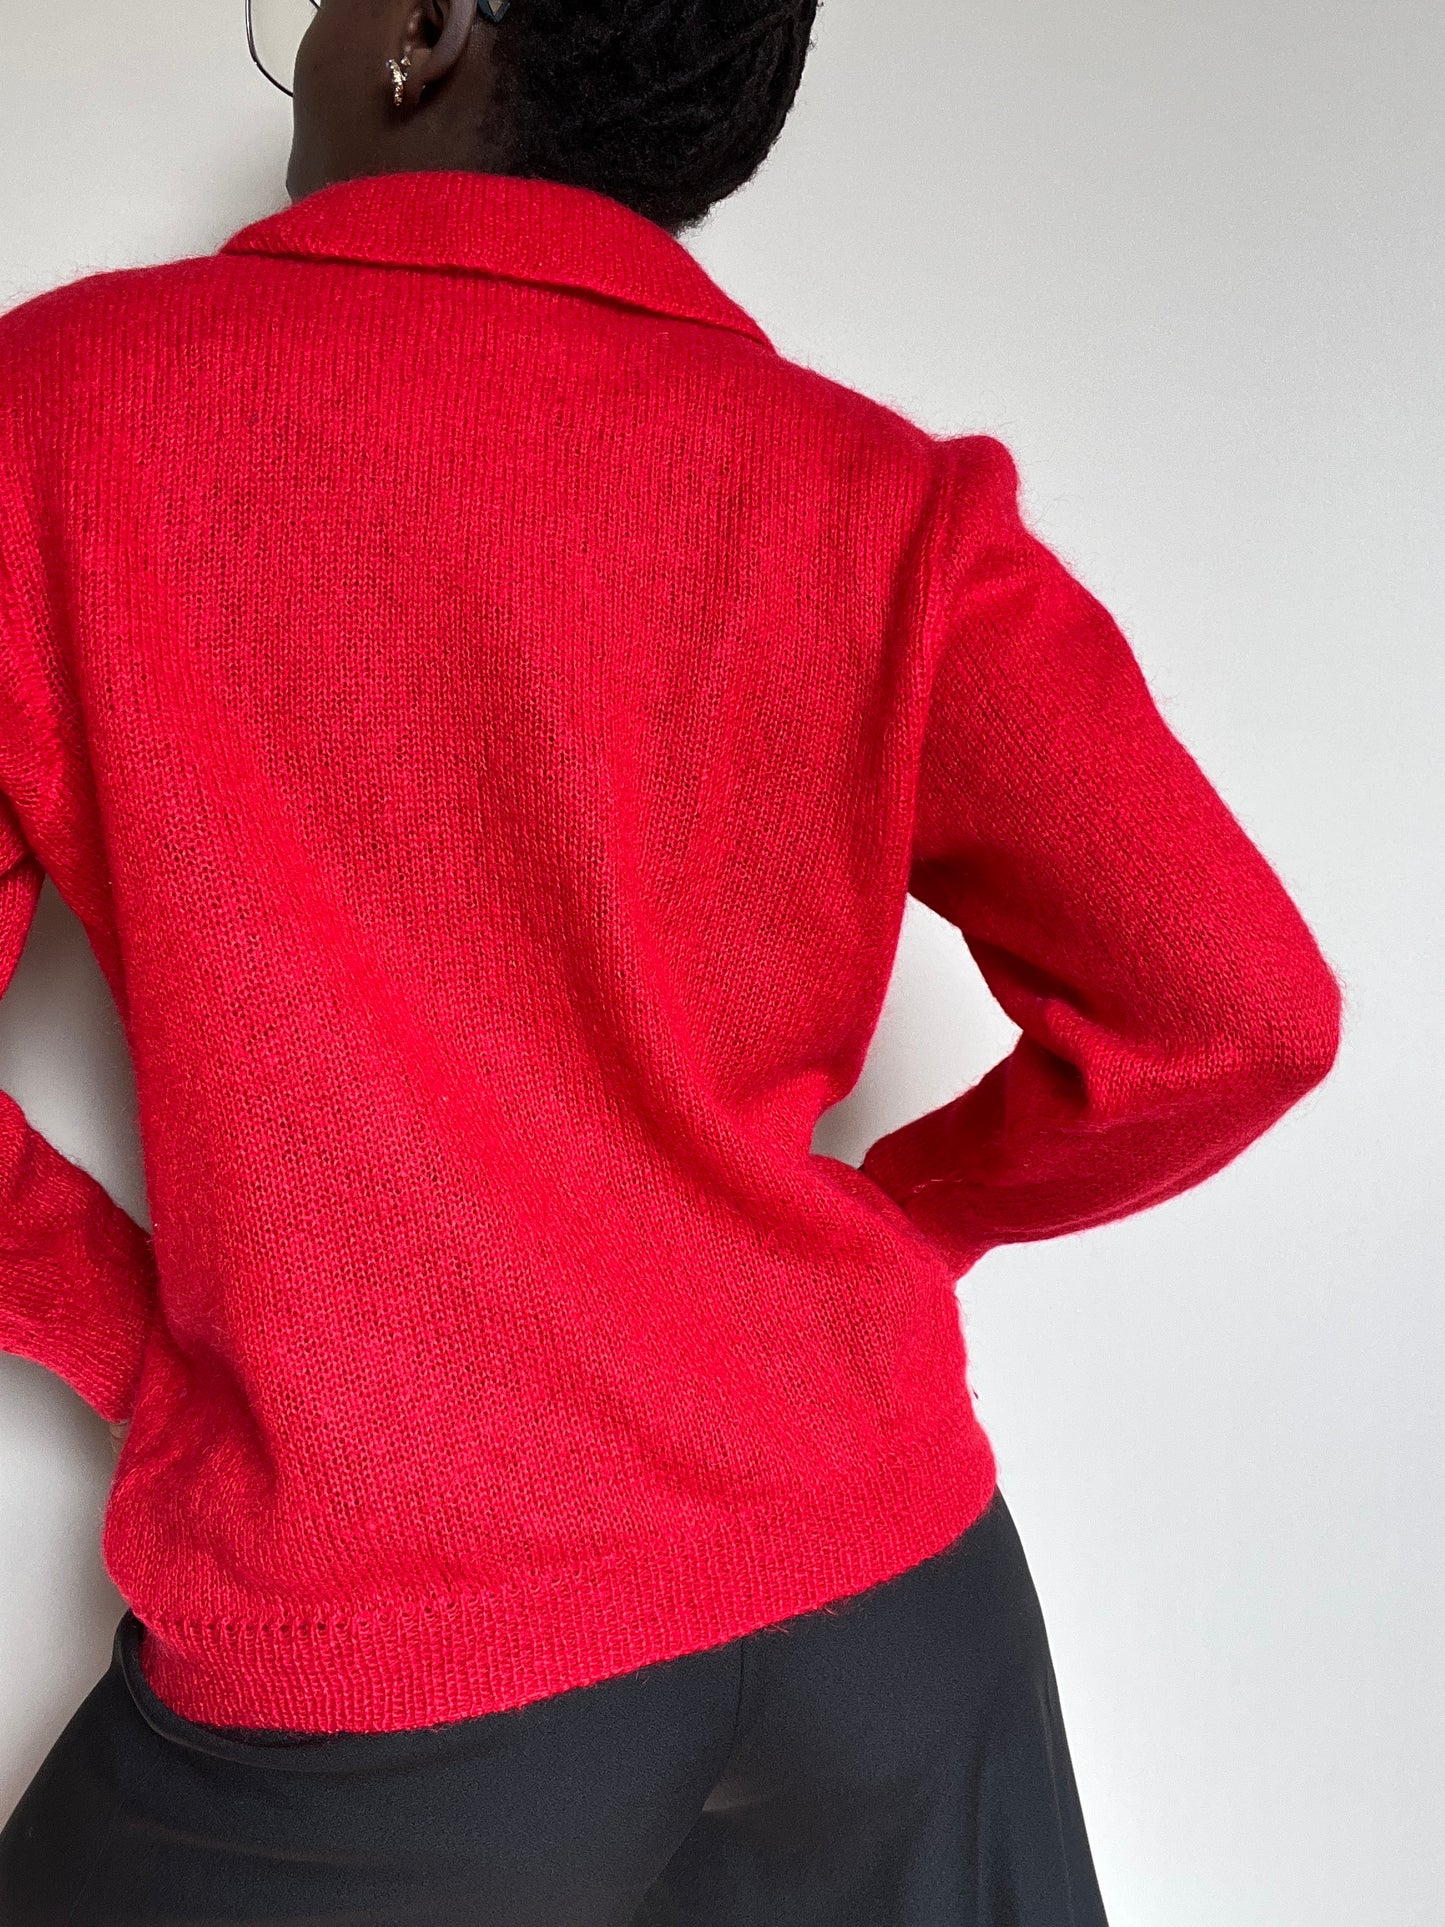 Red Mohair Sweater [M]